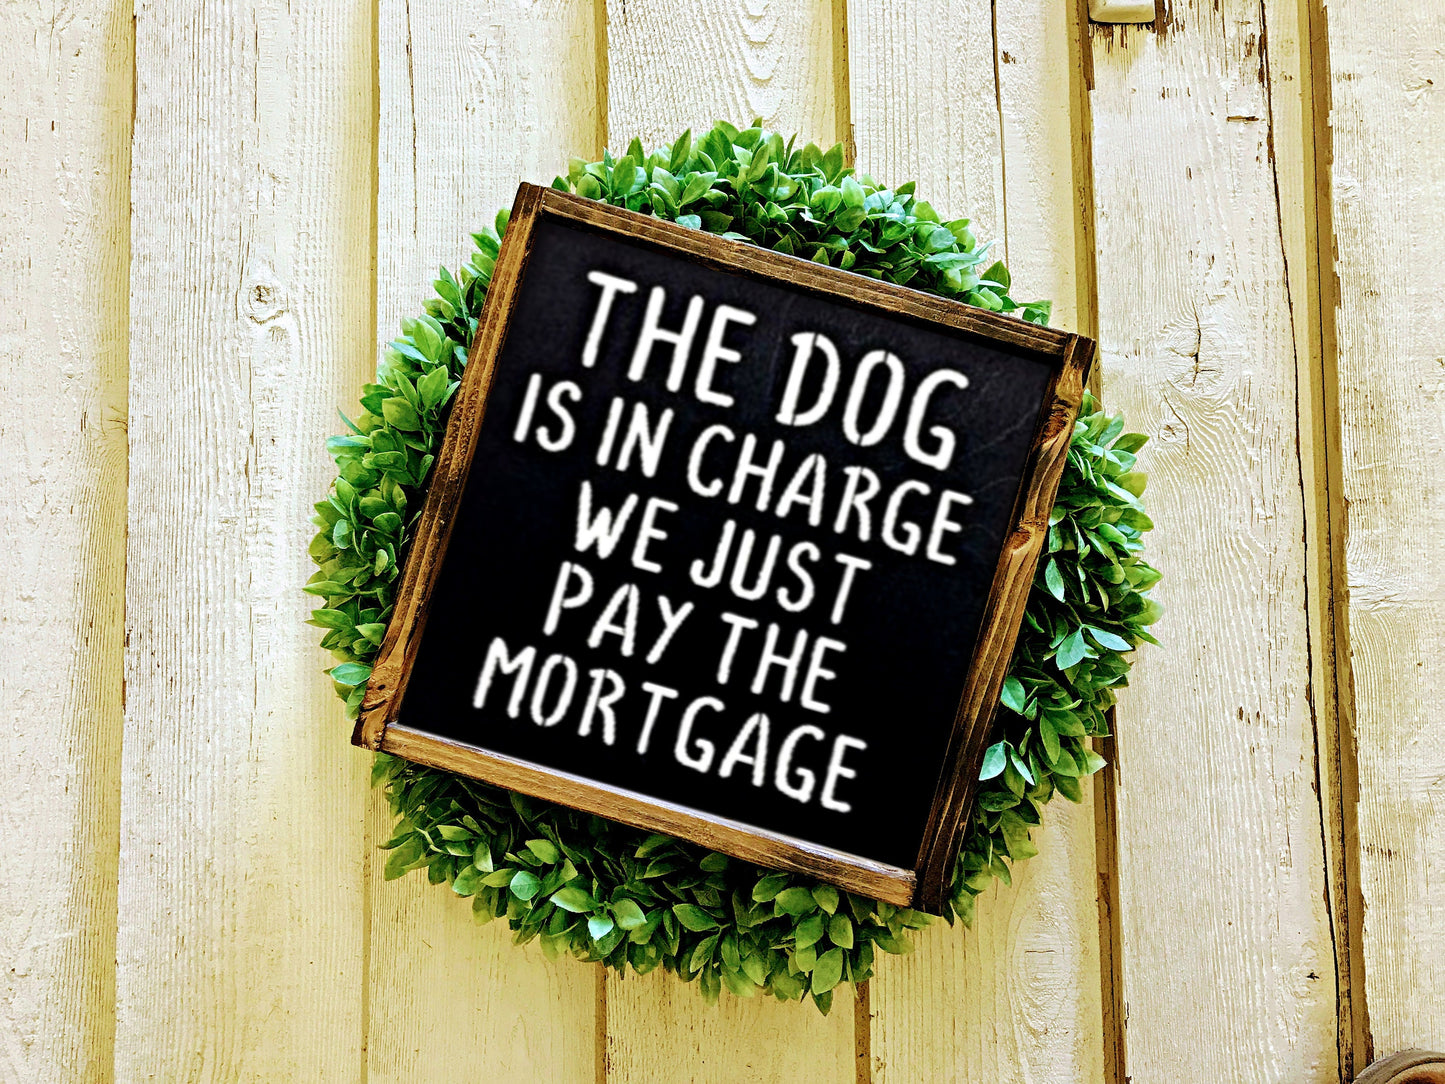 12" & 6"  |  The Dog Is In Charge | We Just Pay The Mortgage| Dog Gift |  wedding gift |  rustic wooden sign | farmhouse decor